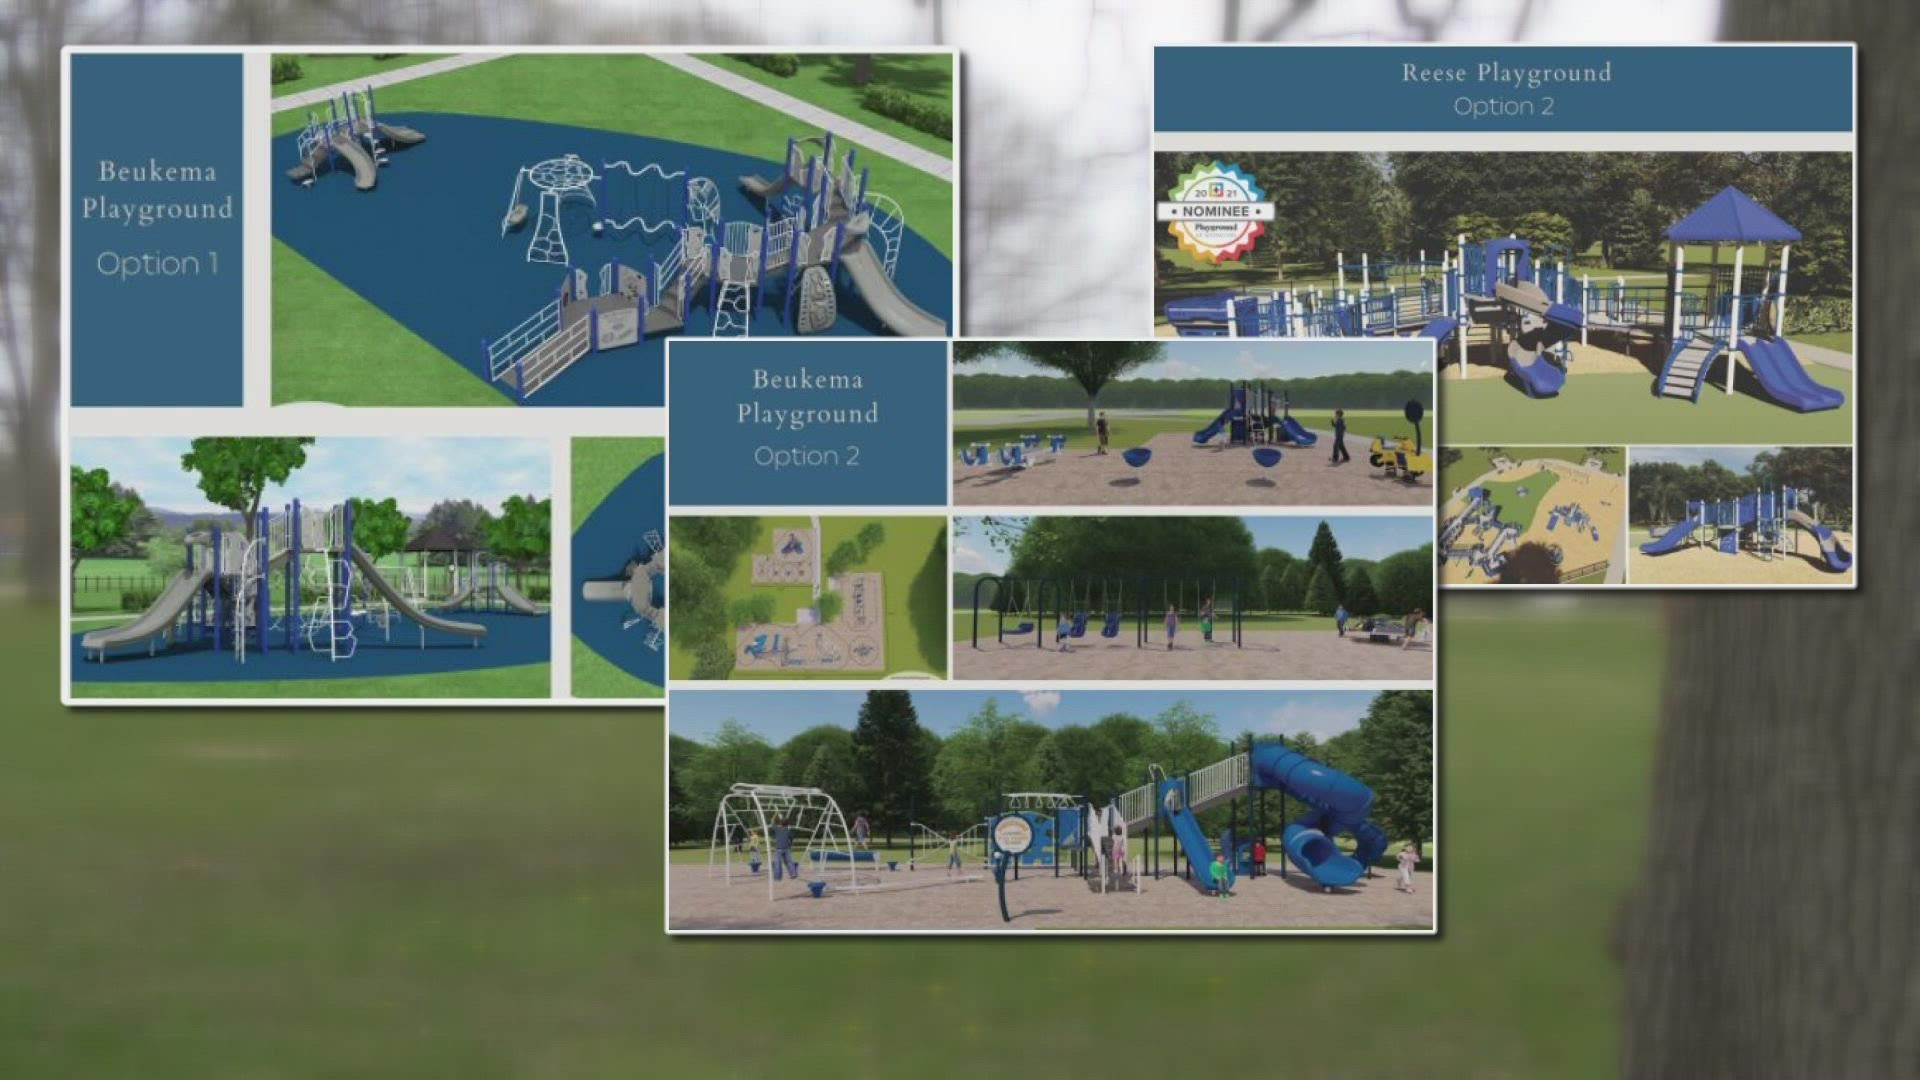 Muskegon residents are asked to vote for the best playground designs for Beukema Park and Reese Playfield.